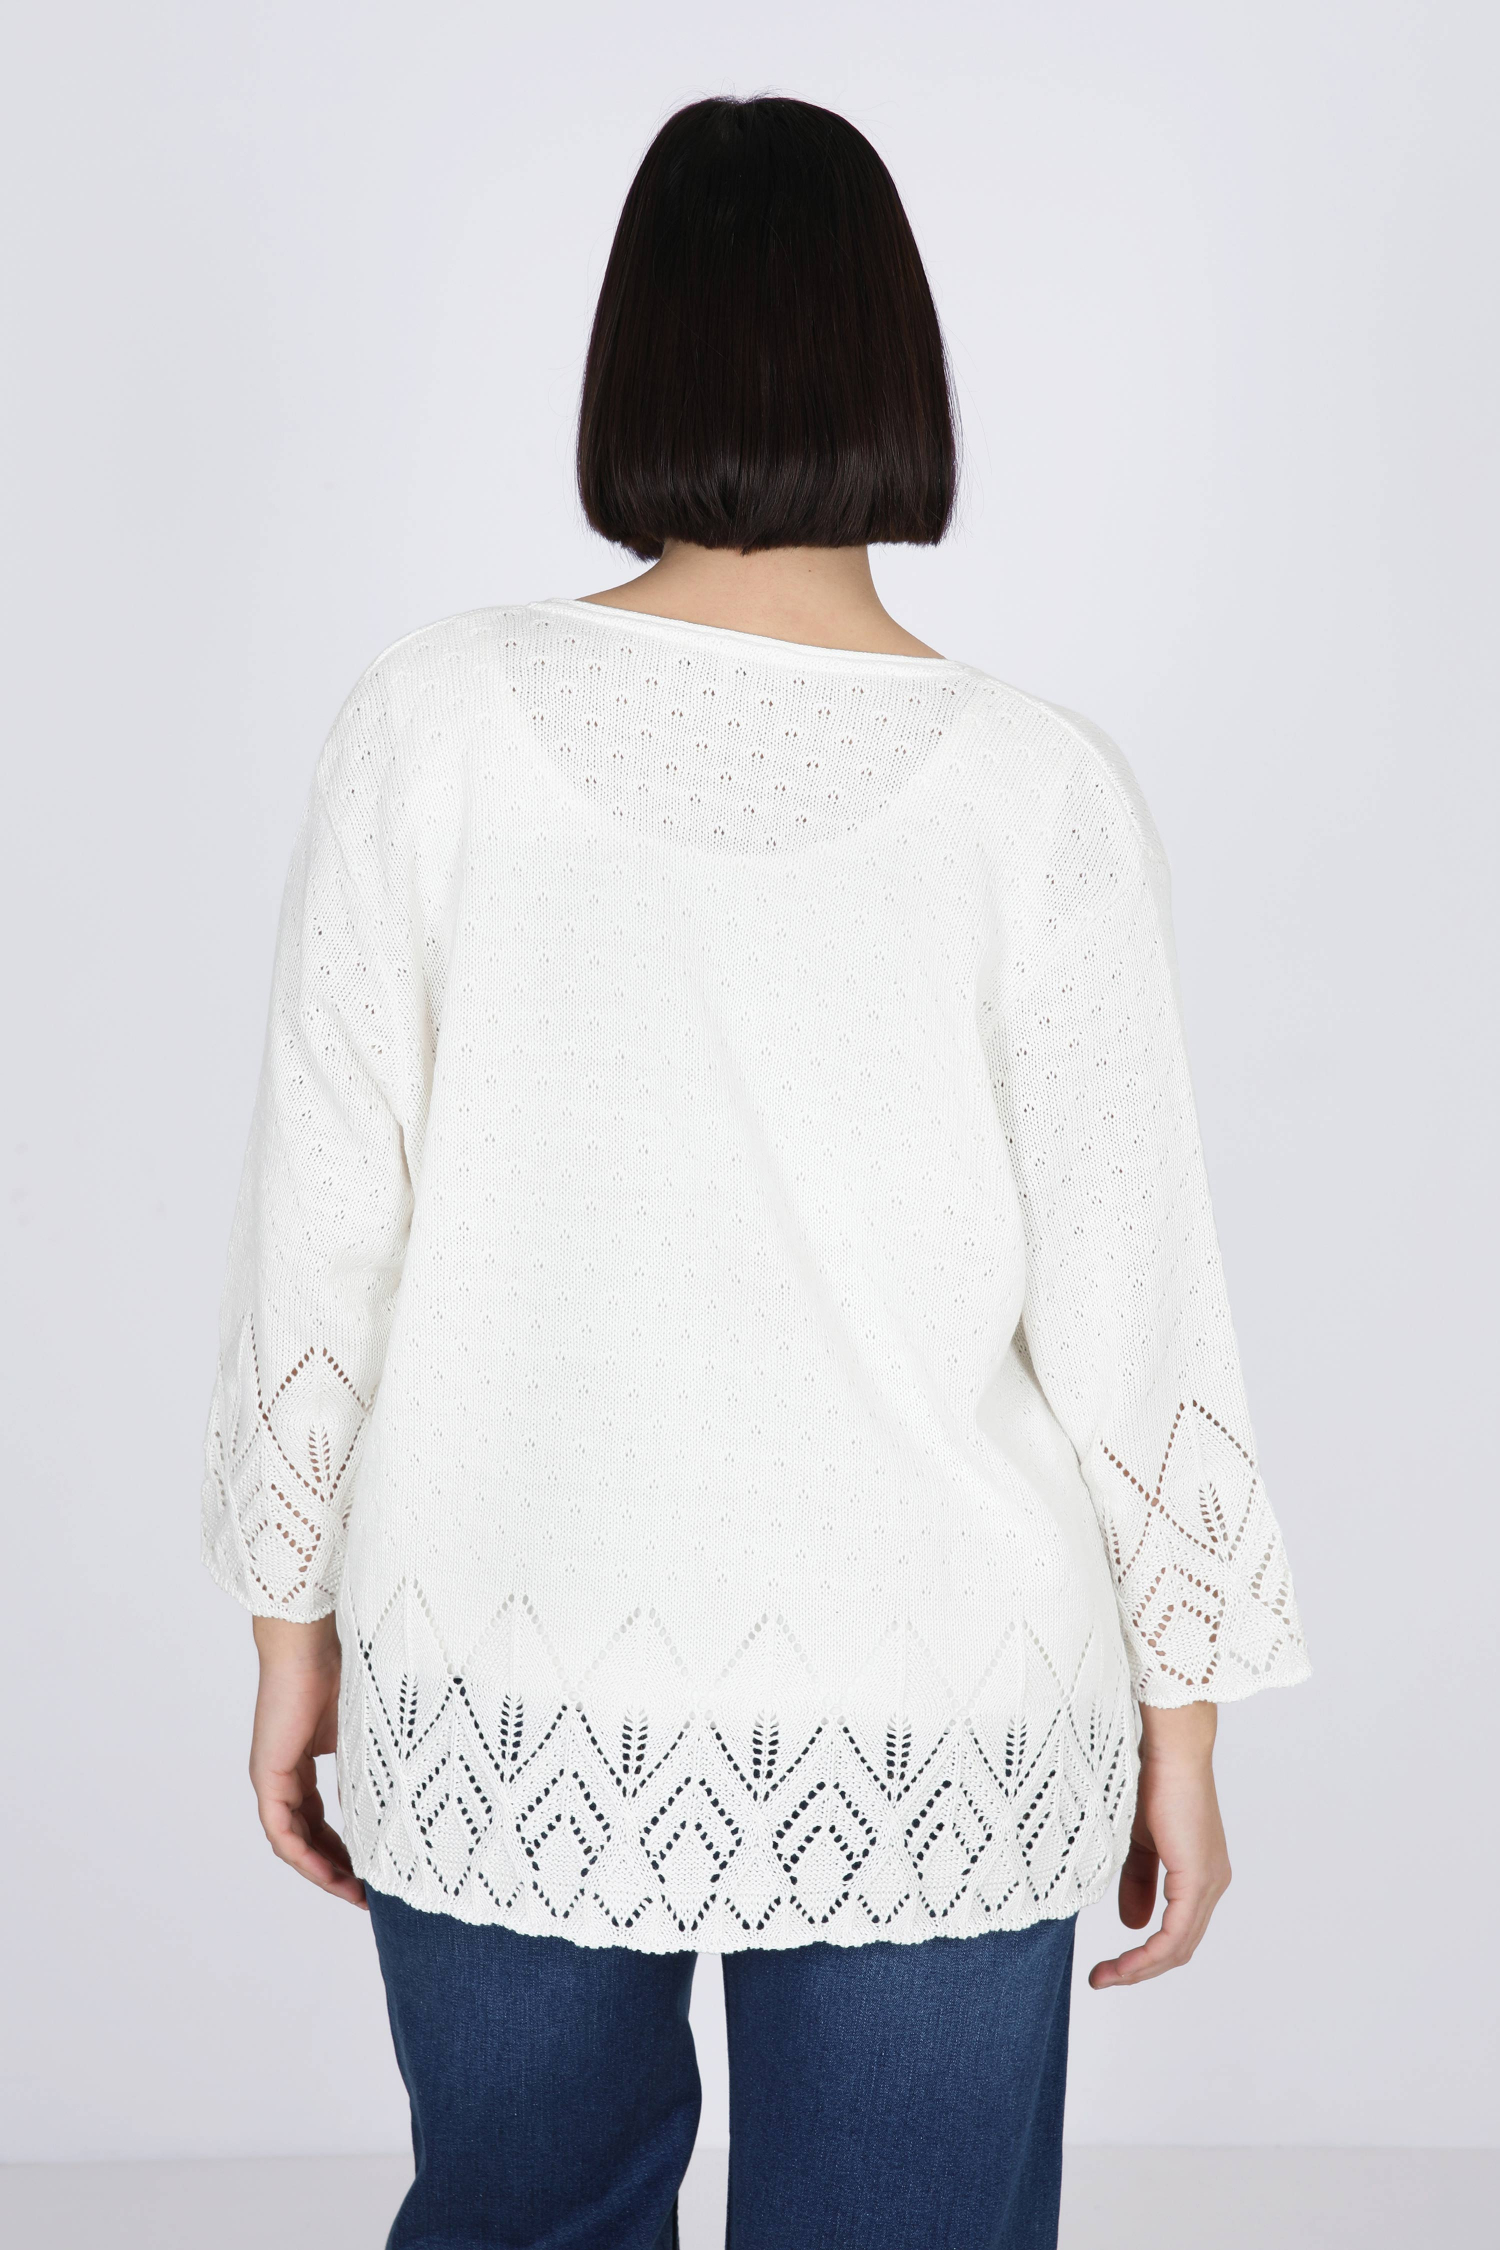 honeycomb and openwork knit cardigan